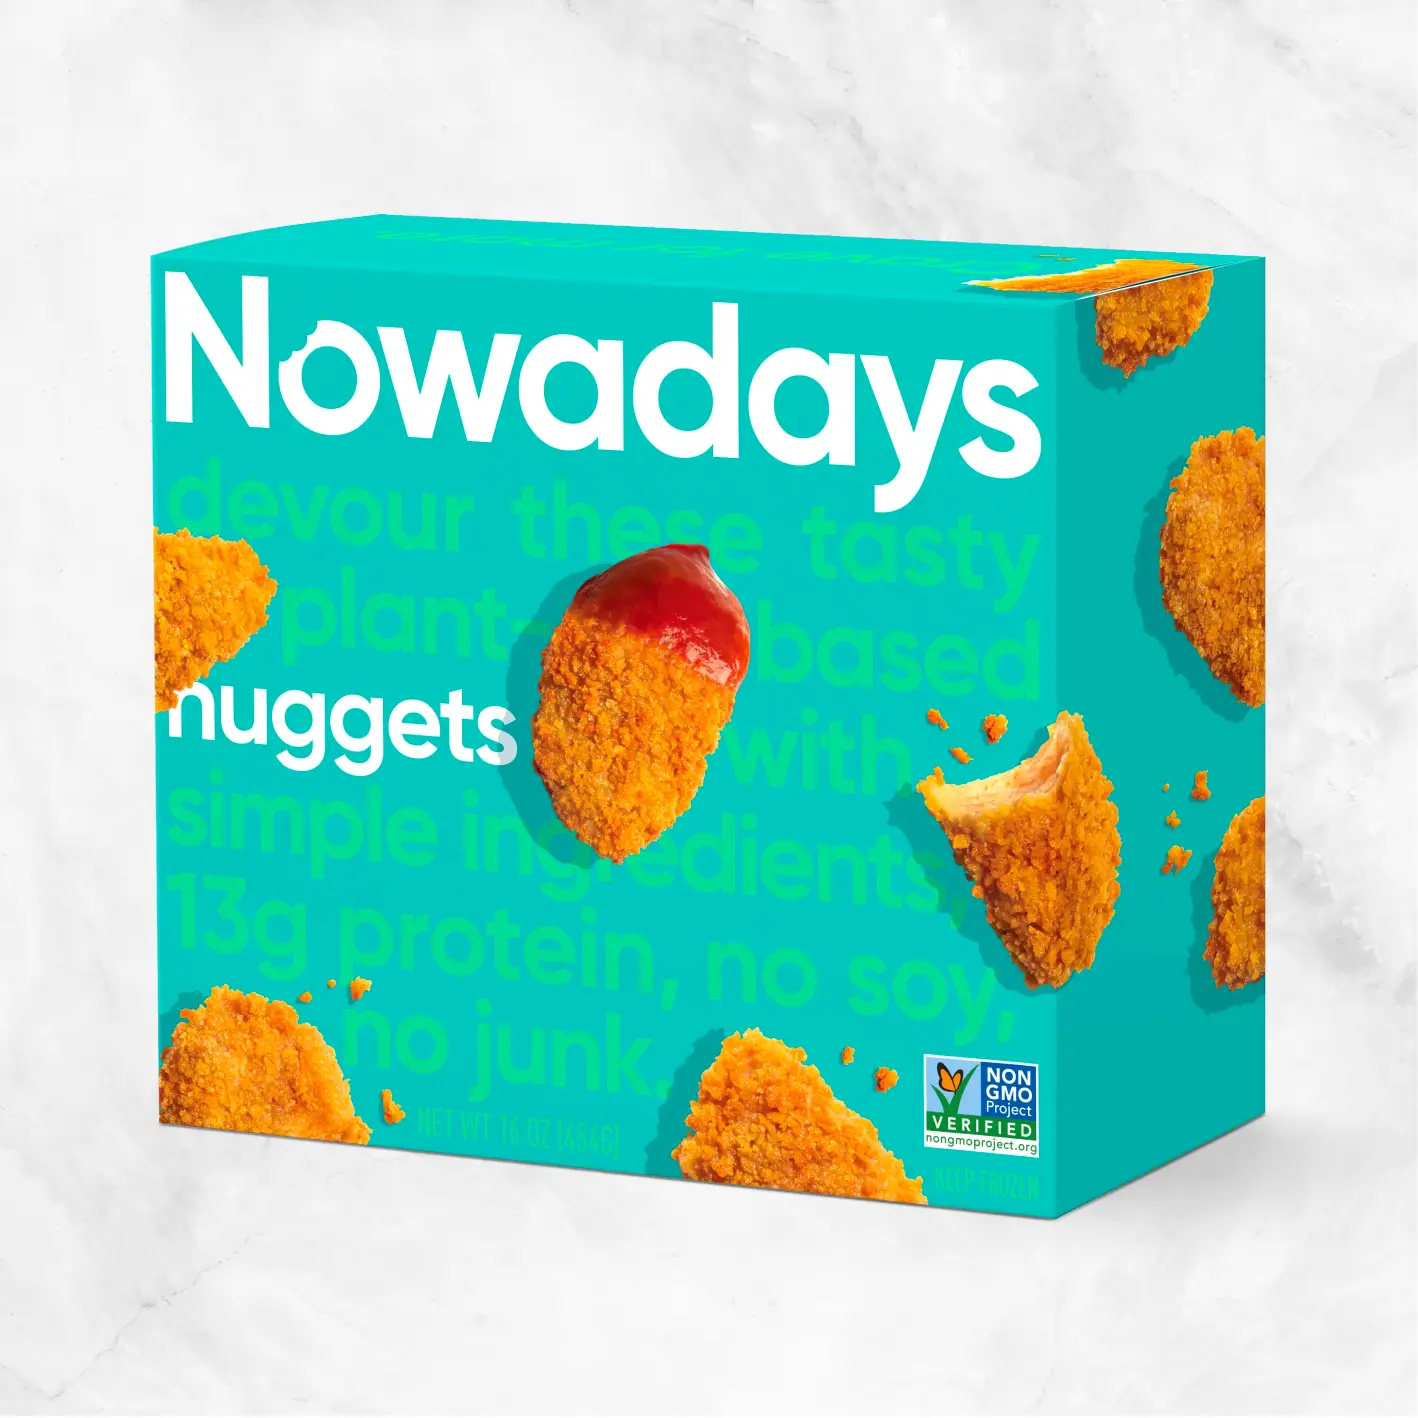 Plant-Based Nuggets